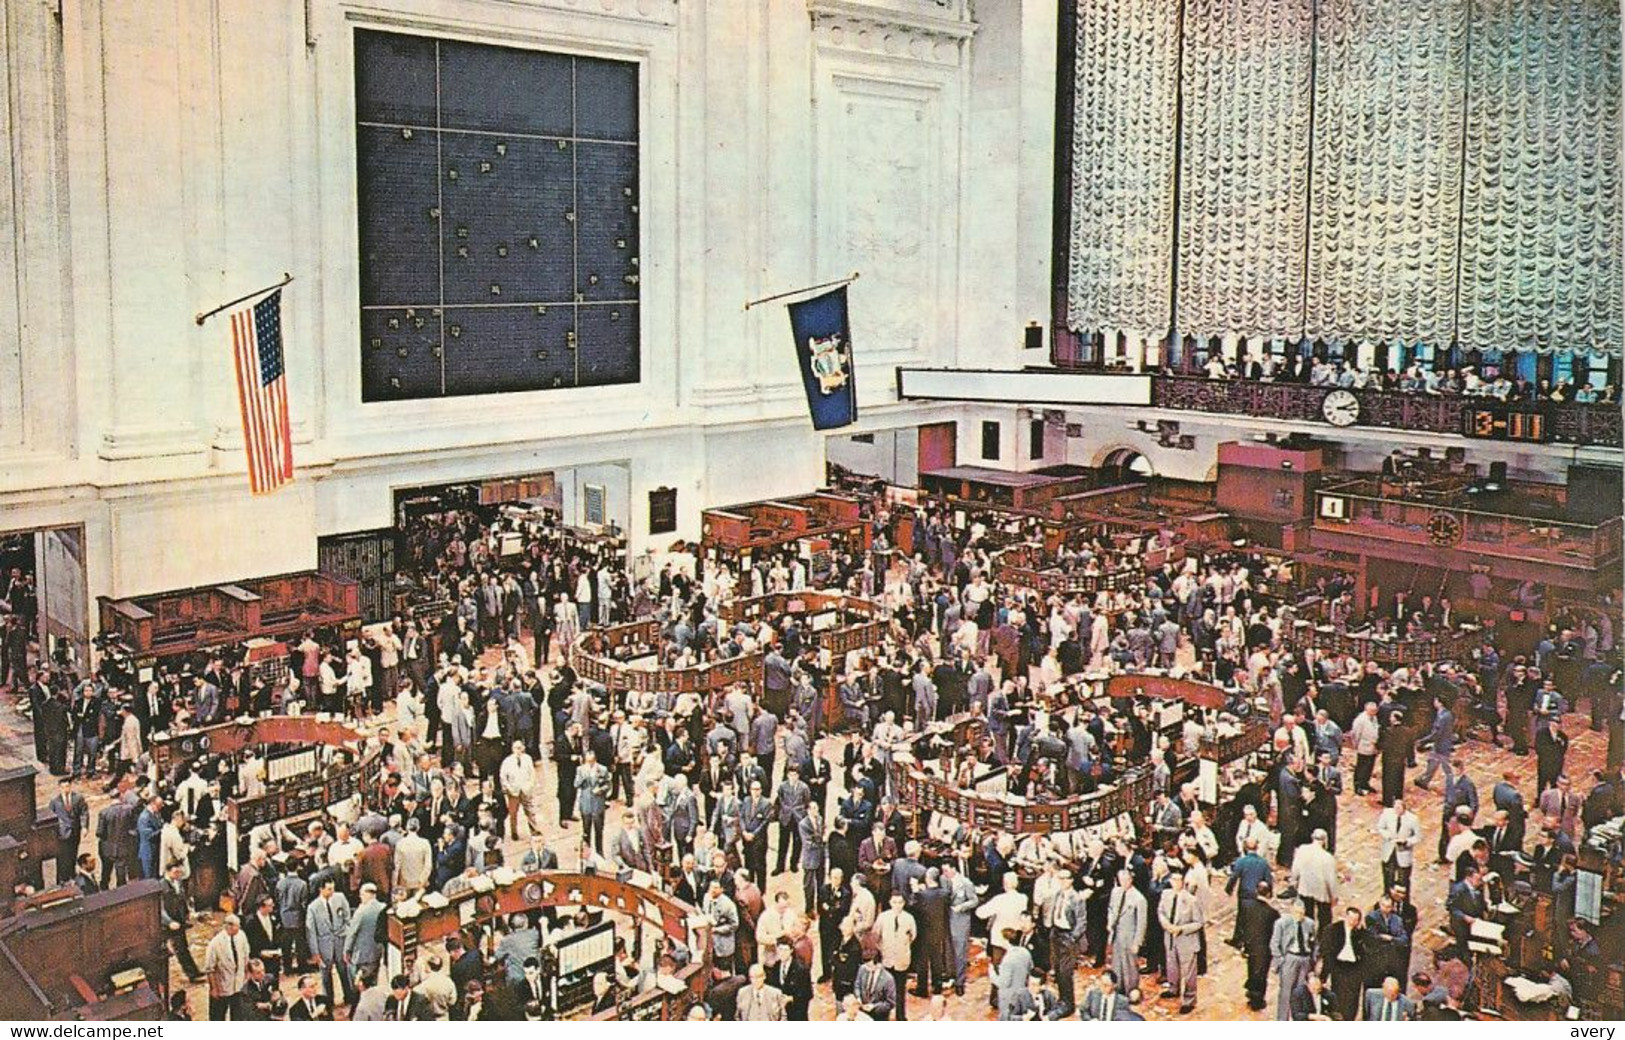 New York Stock Exchange, New York City The Nation's Market Place - Wall Street